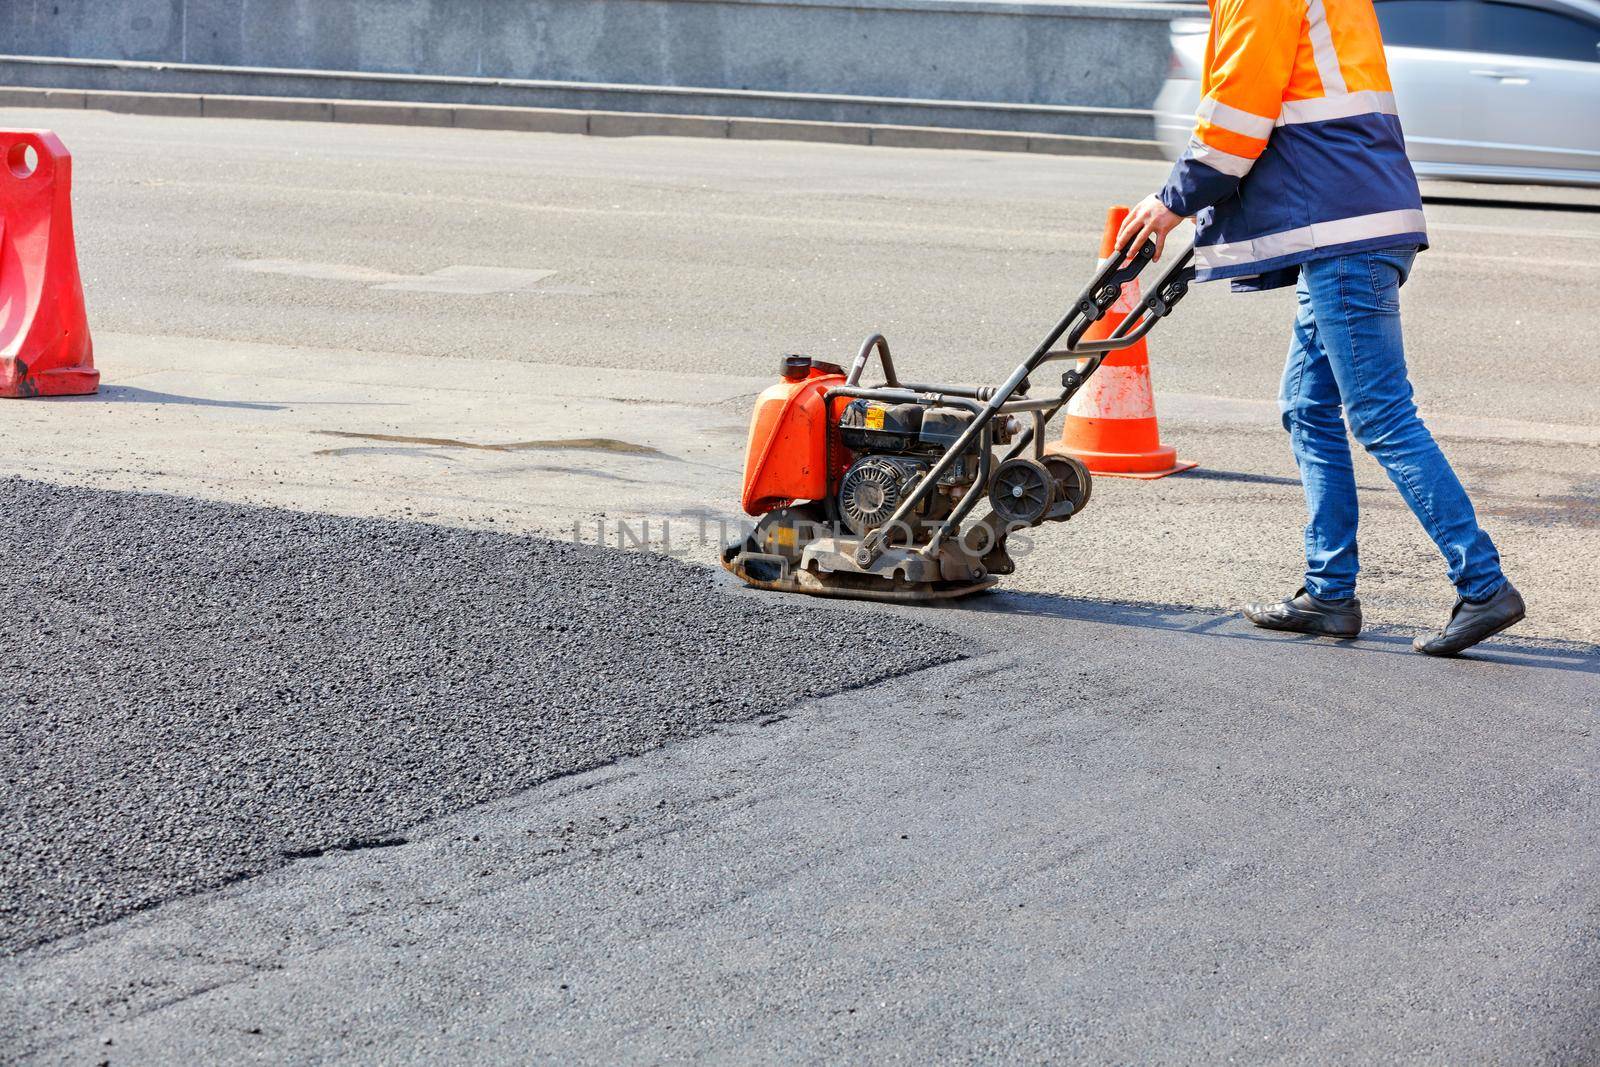 A road worker compacts asphalt with a petrol vibratory plate compactor. by Sergii